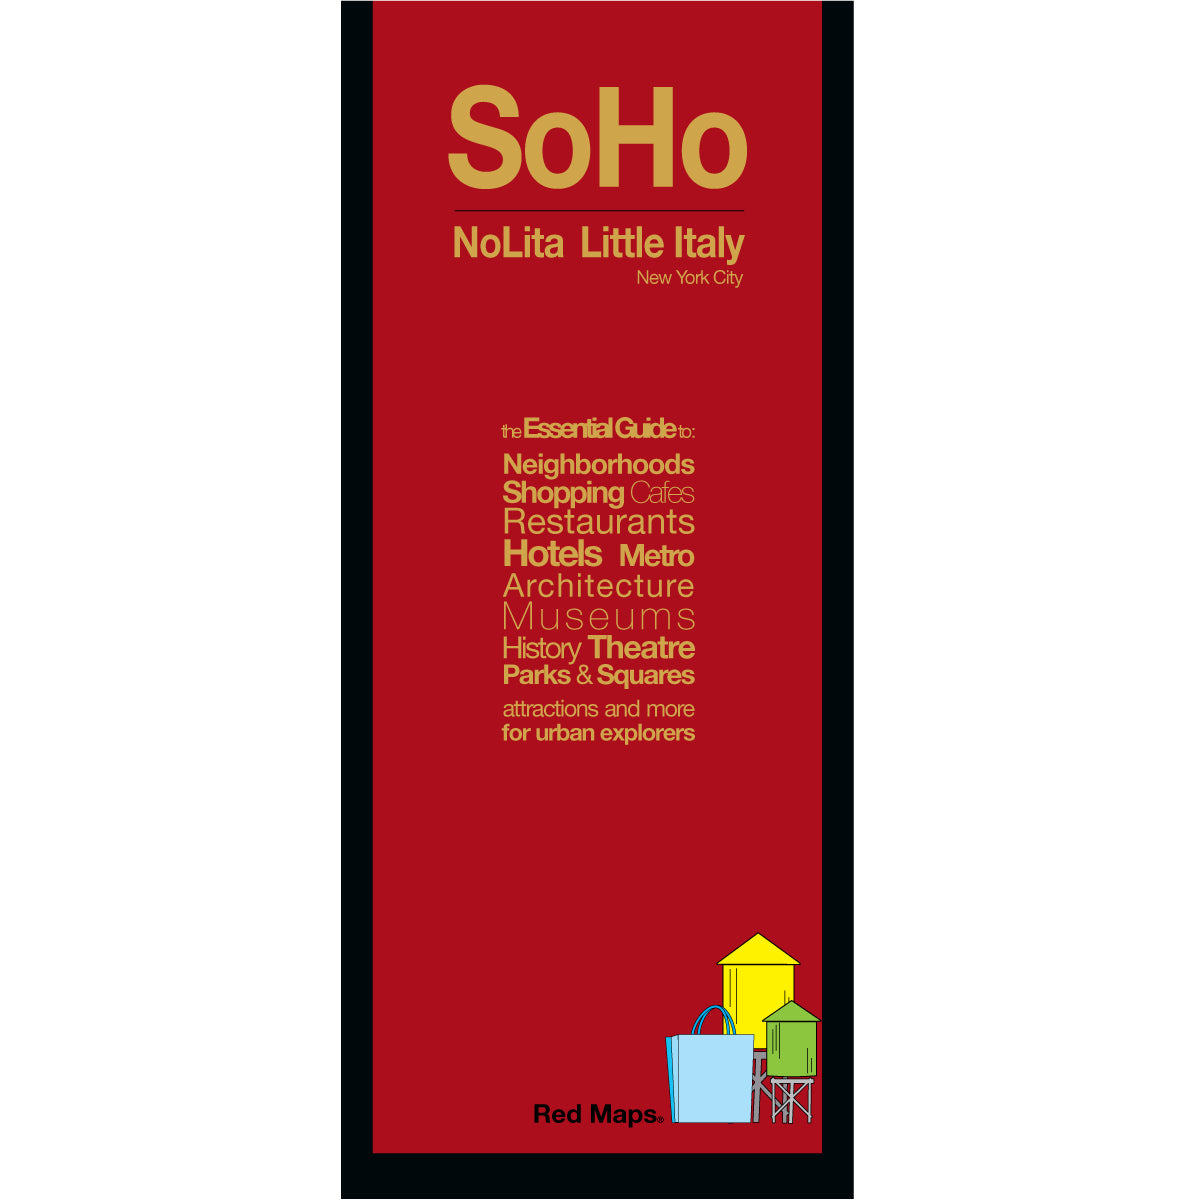 Soho and Nolita foldout neighborhood map with a red colored cover.